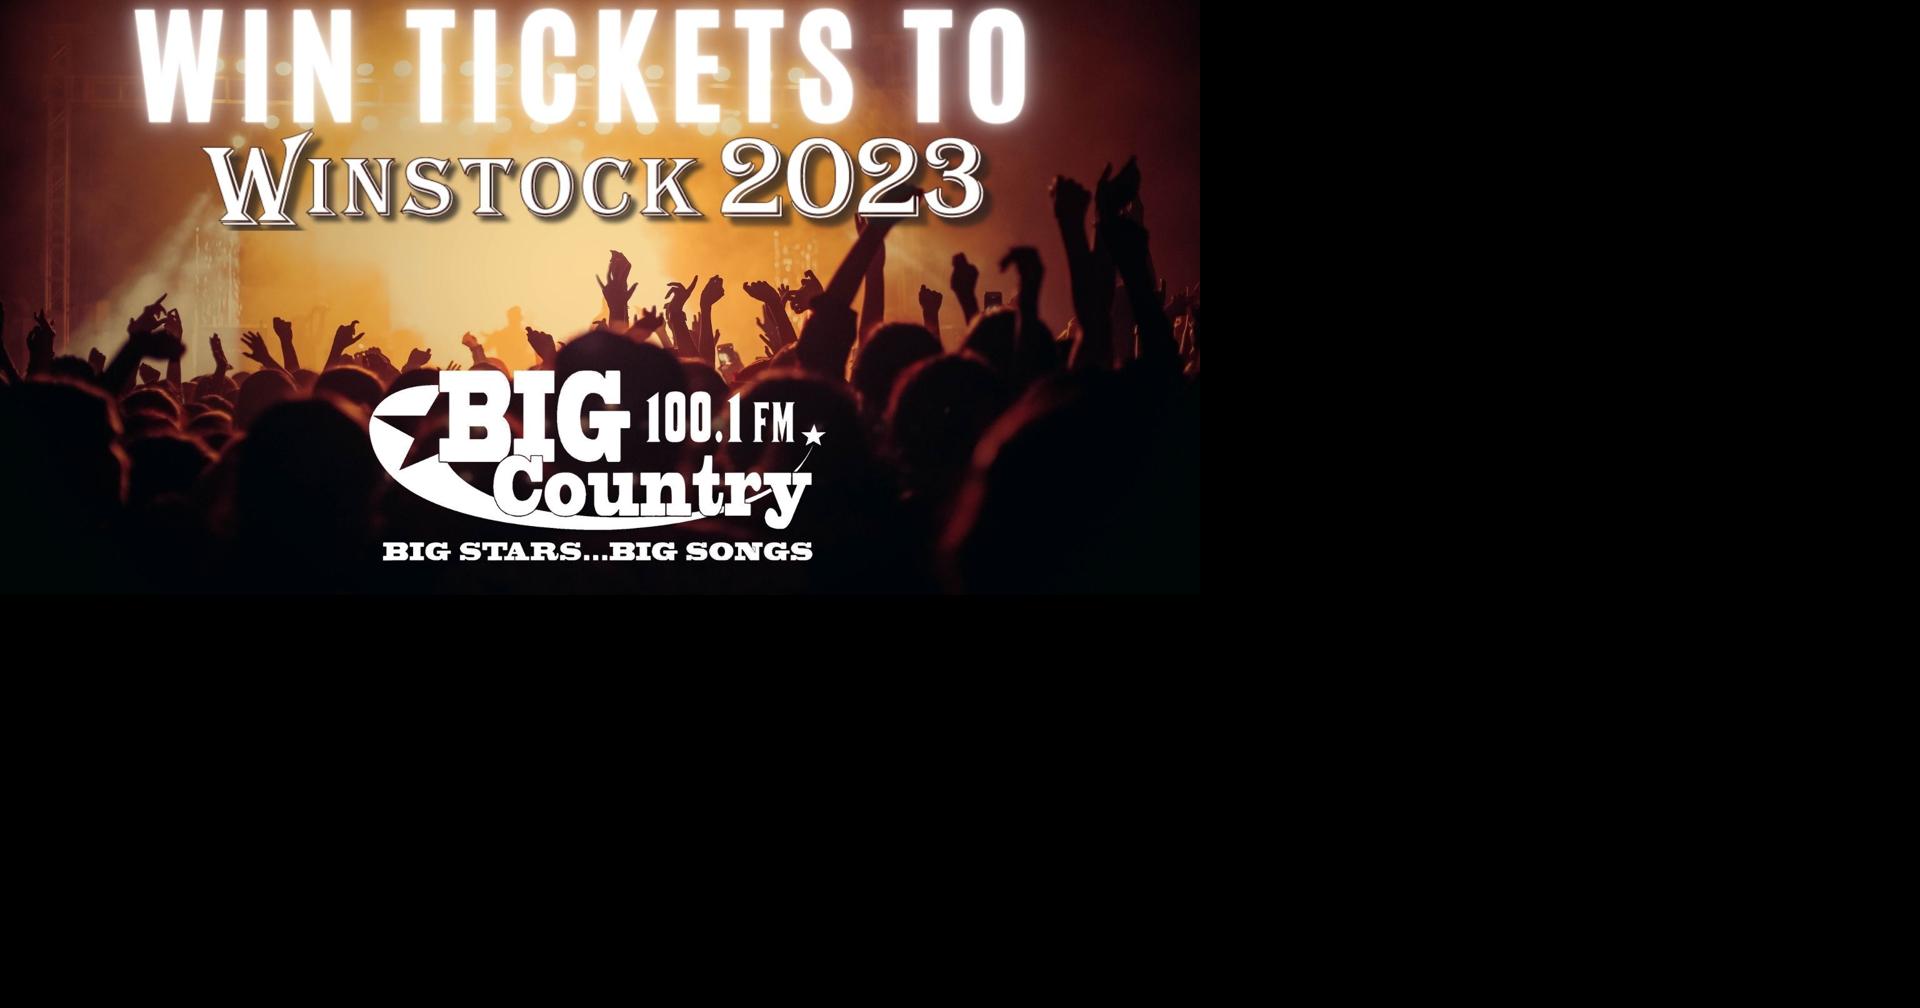 ENTER TO WIN Tickets to Winstock!